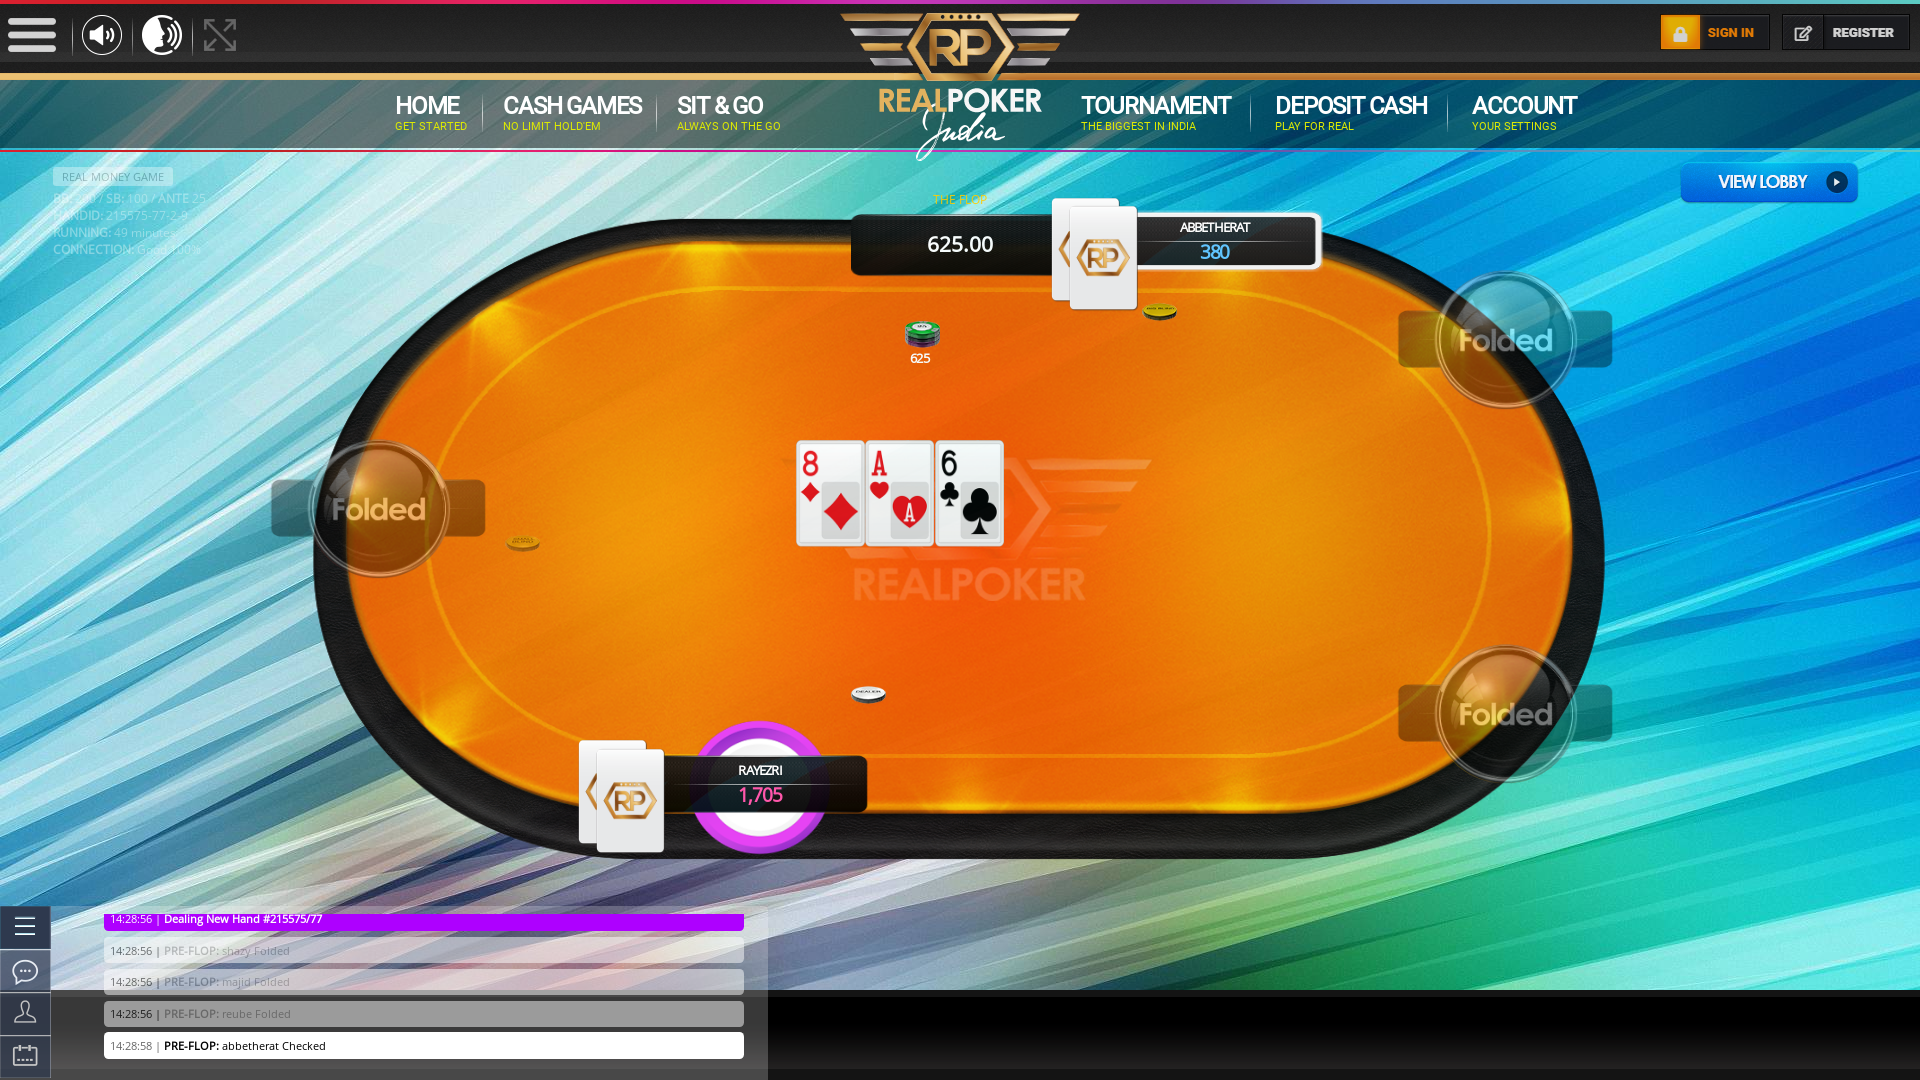 Real poker 10 player table in the 49th minute of the match